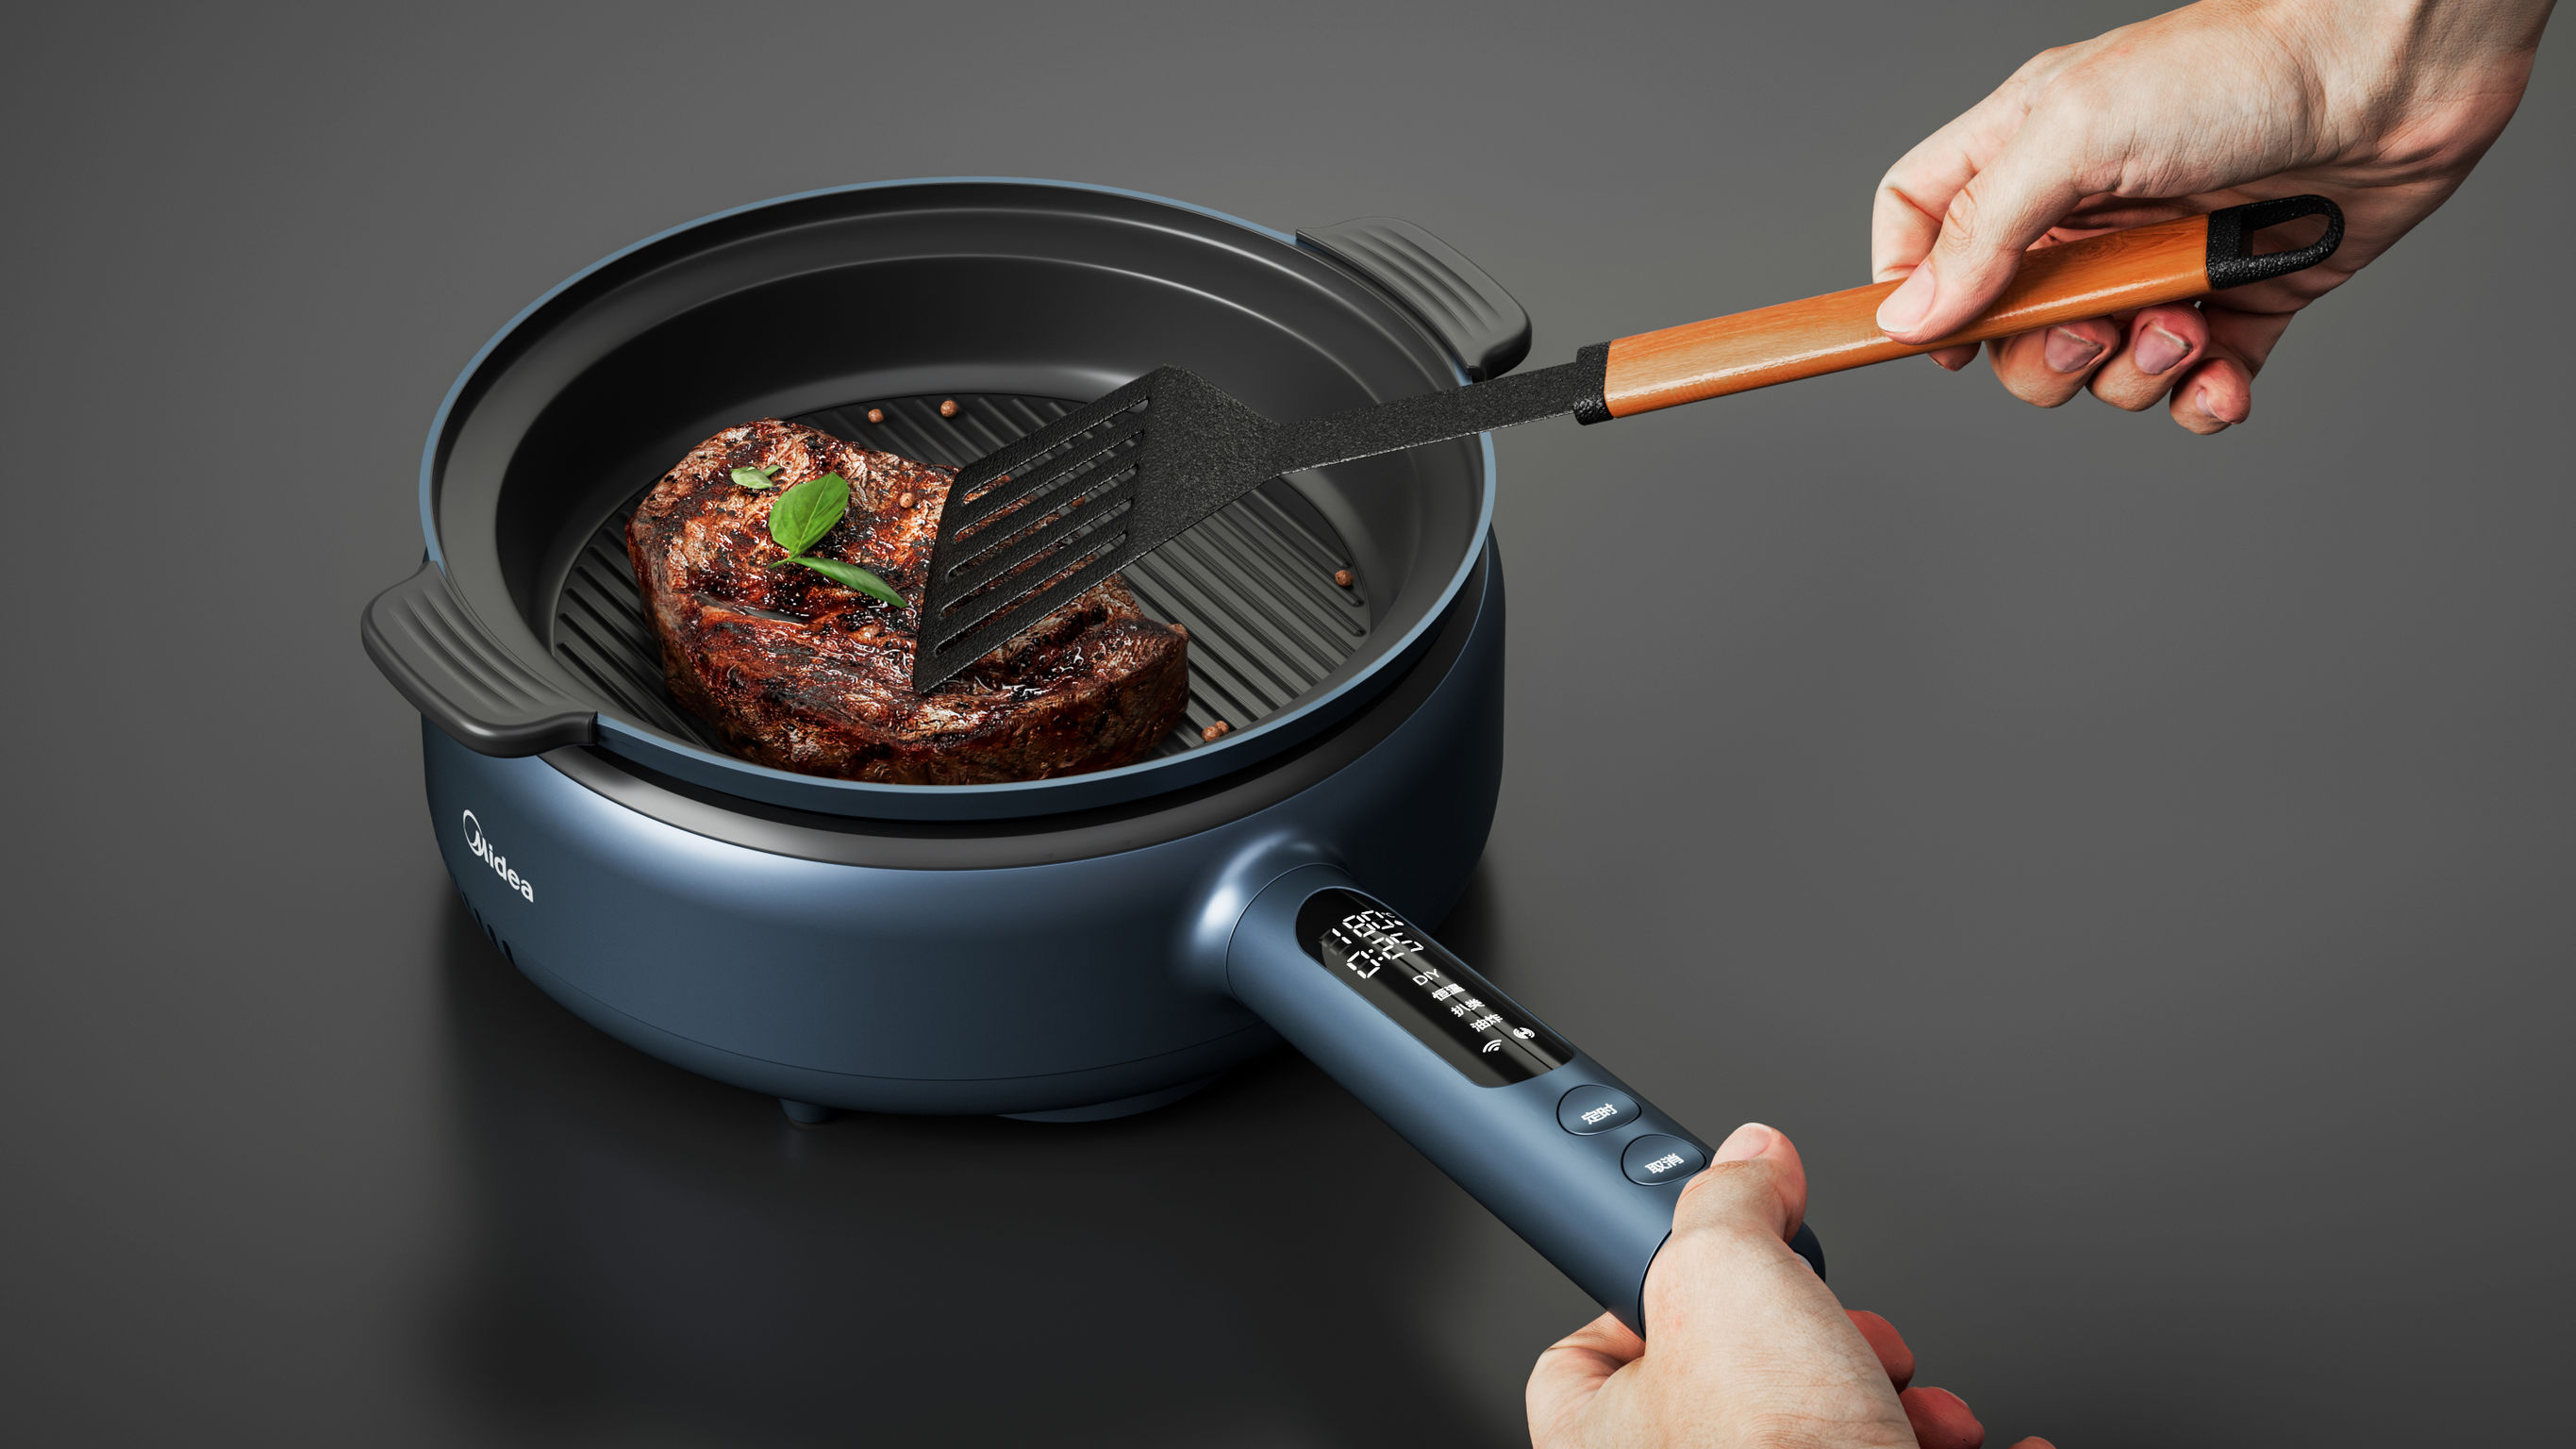 “Magic Handle” induction cooker